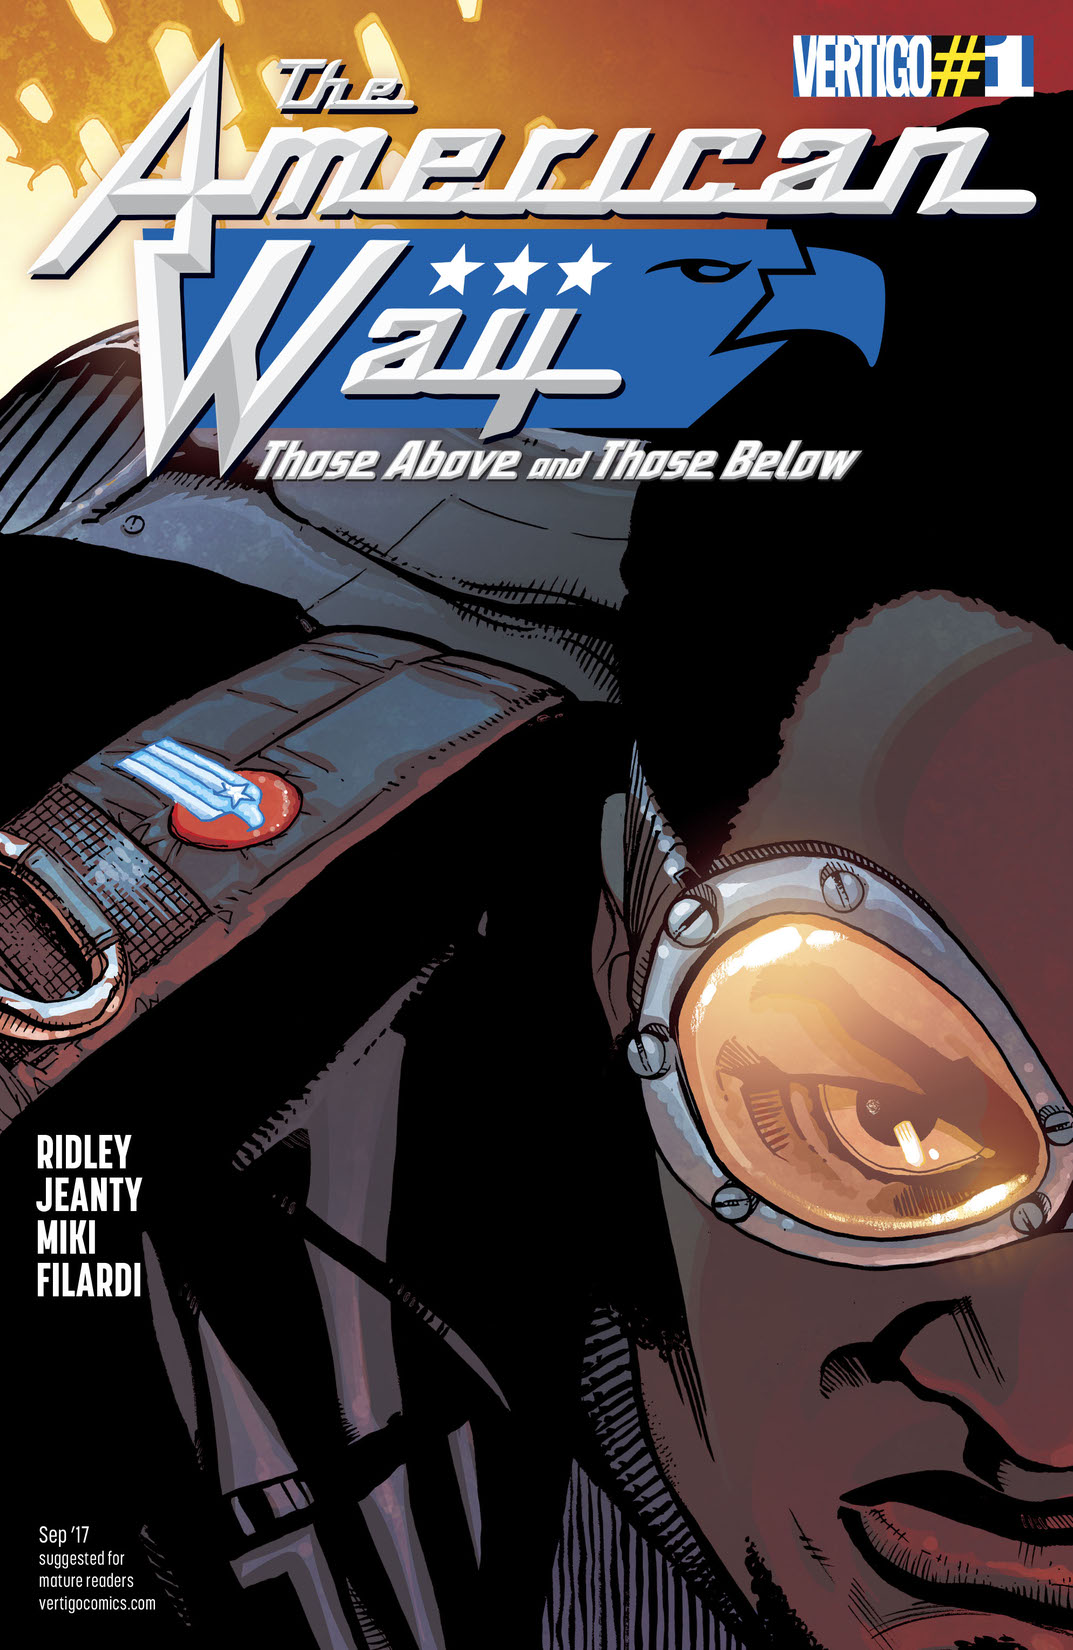 The American Way: Those Above and Those Below #1 preview images